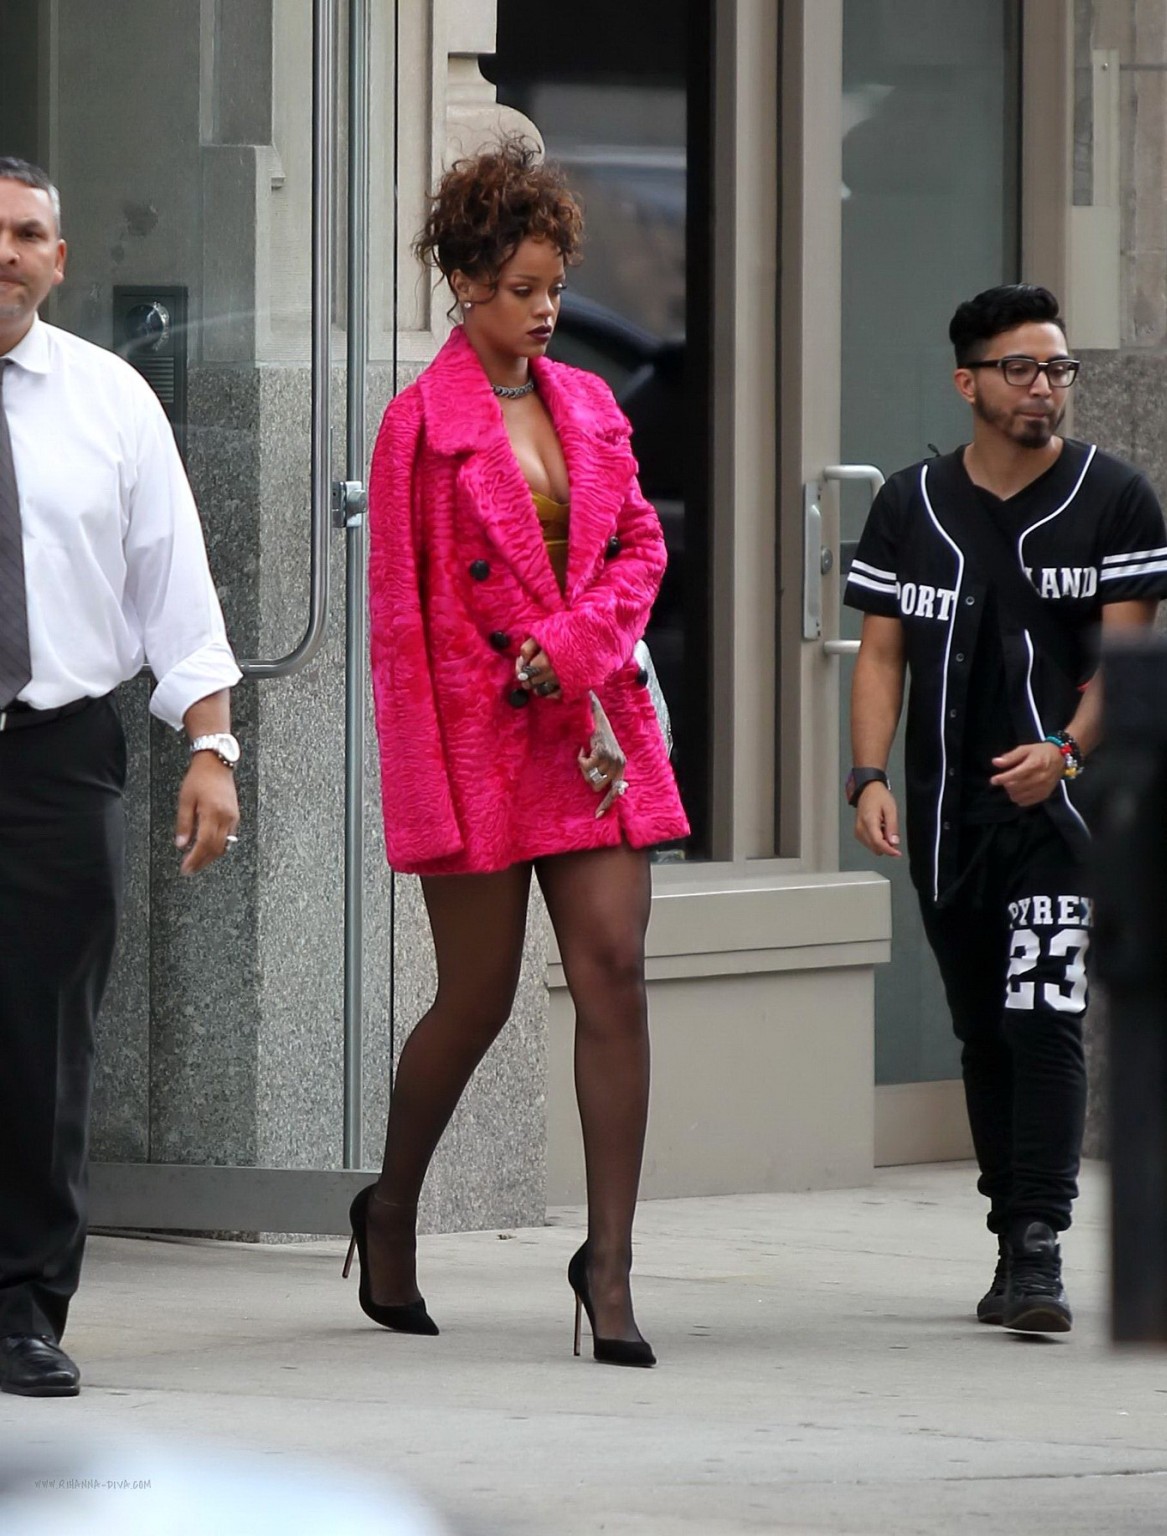 Rihanna shows cleavage and legs wearing a little yellow dress outside Nobu resta #75183272